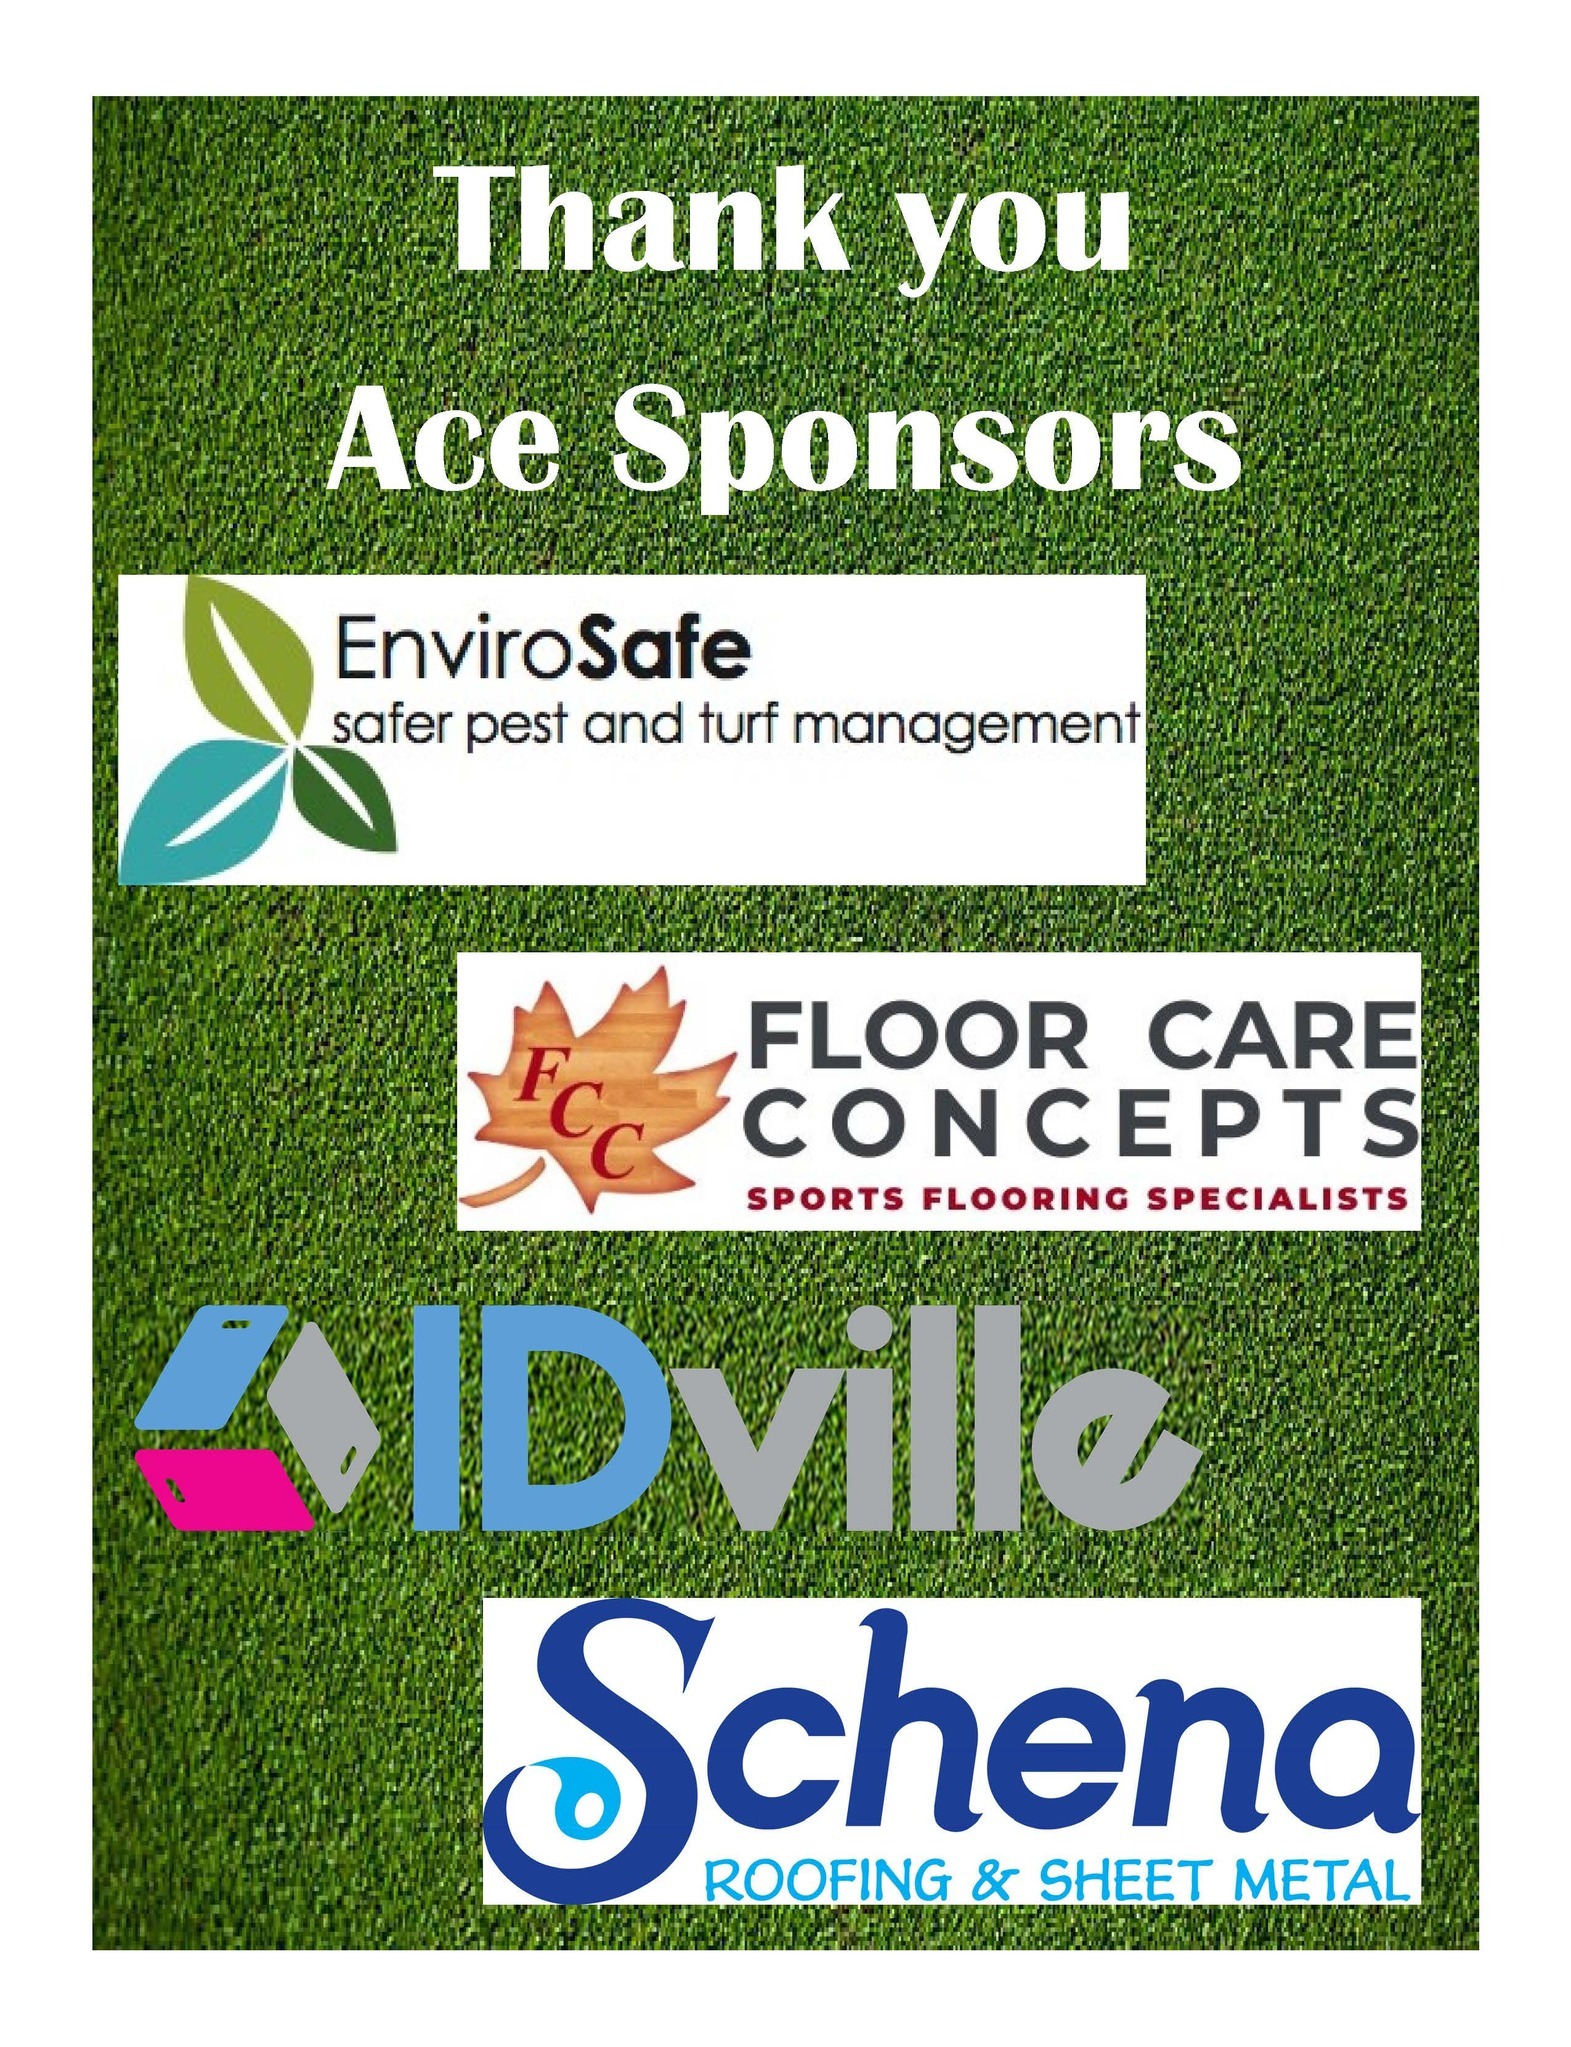 Listing of Ace Sponsors of the 2024 golf outing: EnviroSafe, Floor Care Concepts, IDville and Schena Roofing & Sheet Metal